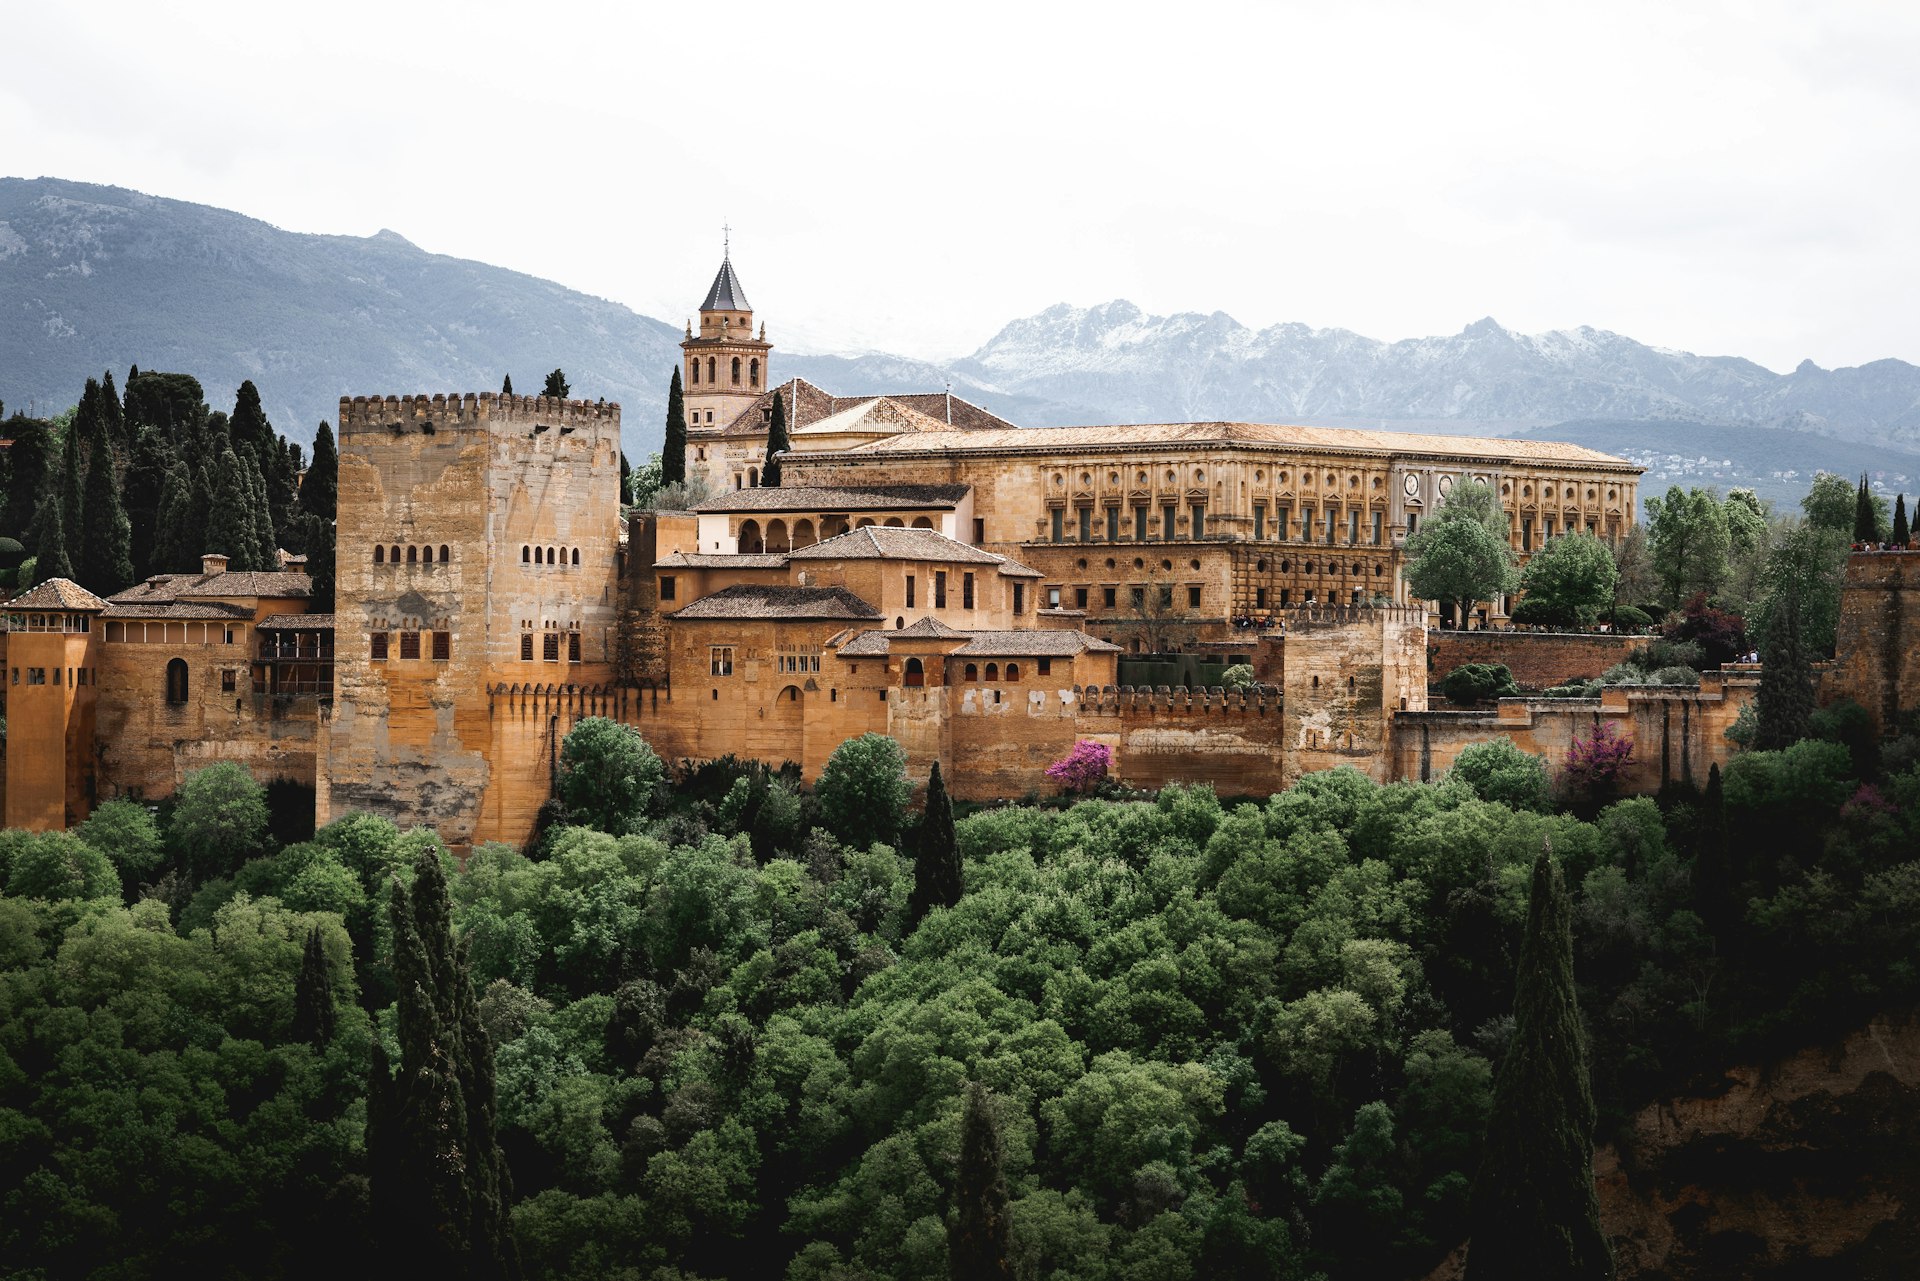 A view of the vast Alhambra palace and fortress complex. The foothills are surrounded by a forest of deep green trees and behind in the distance is a range of snow-dusted mountains.